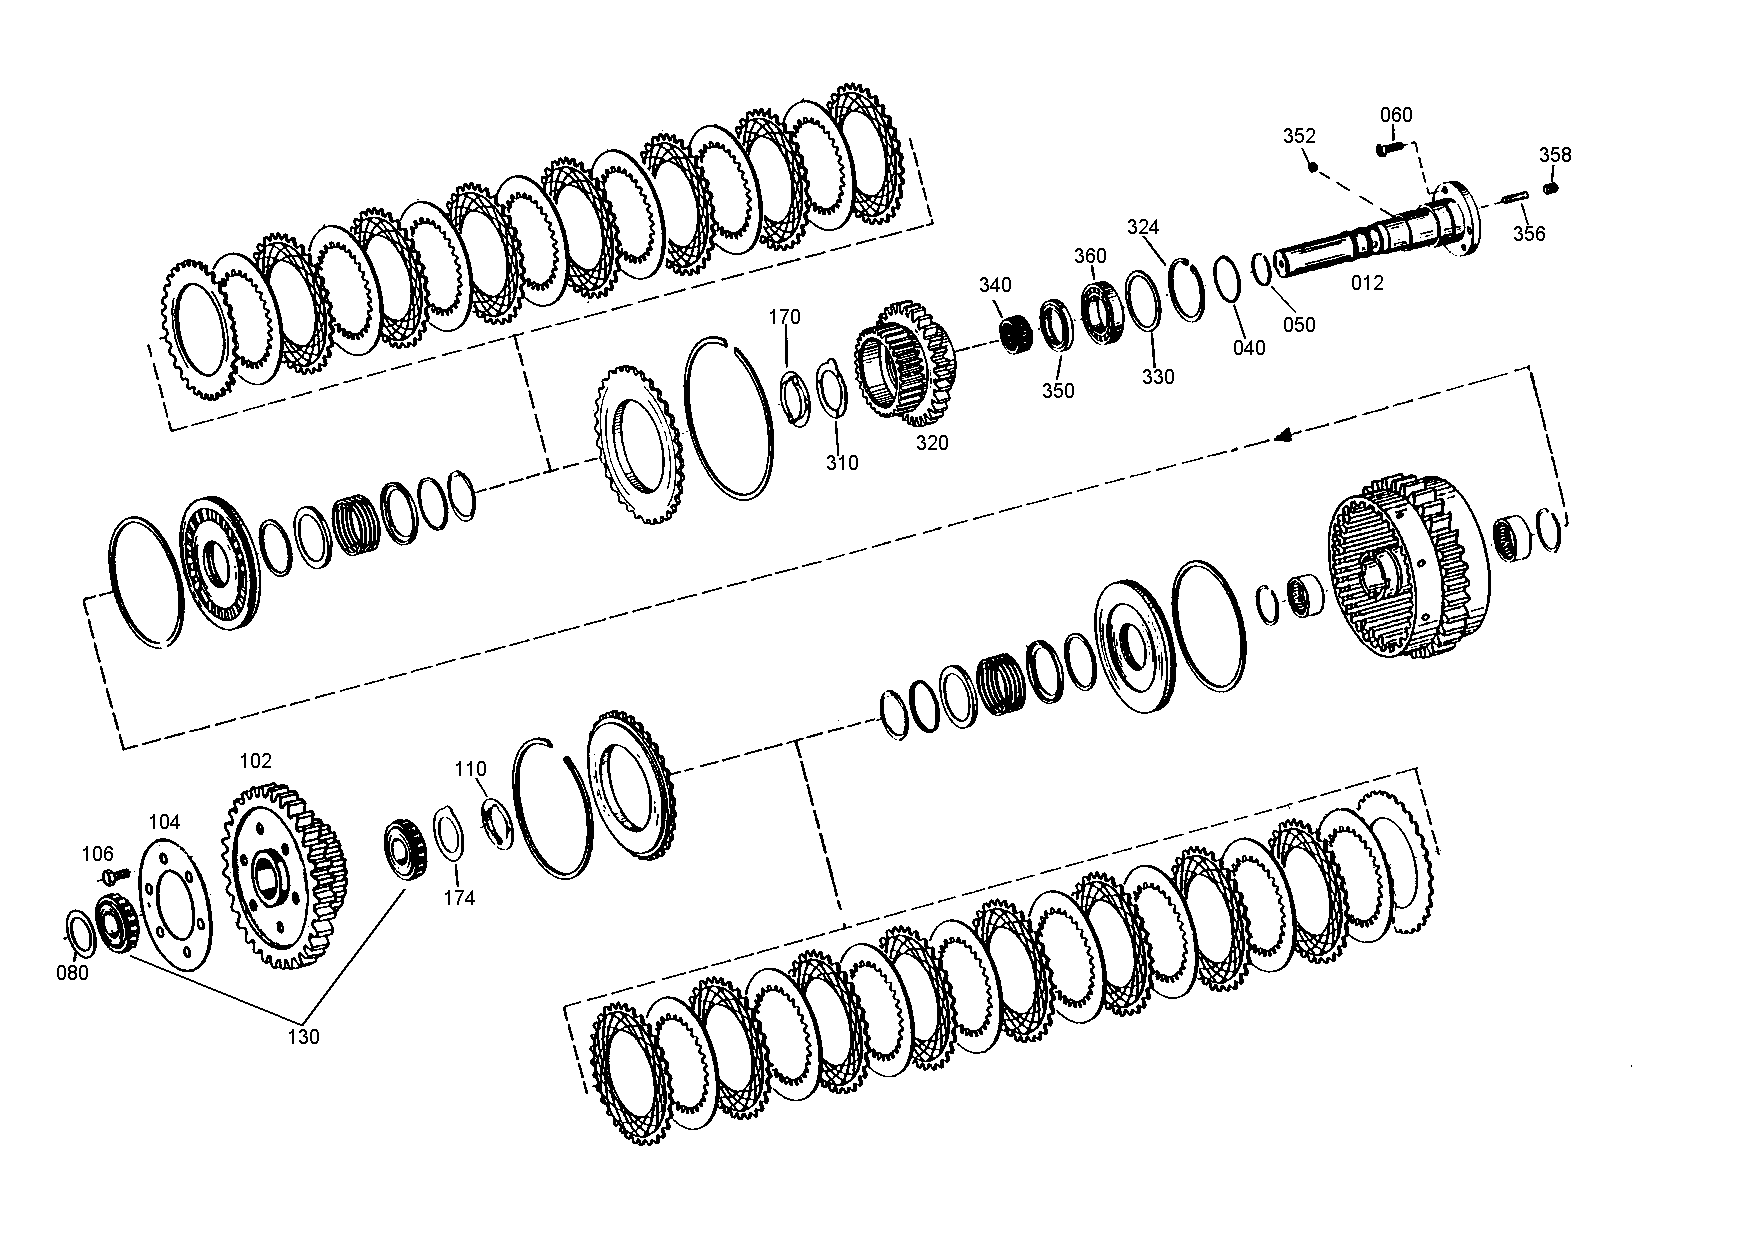 drawing for ATOY OY ATOCO 054 - CYLINDER ROLLER (figure 5)